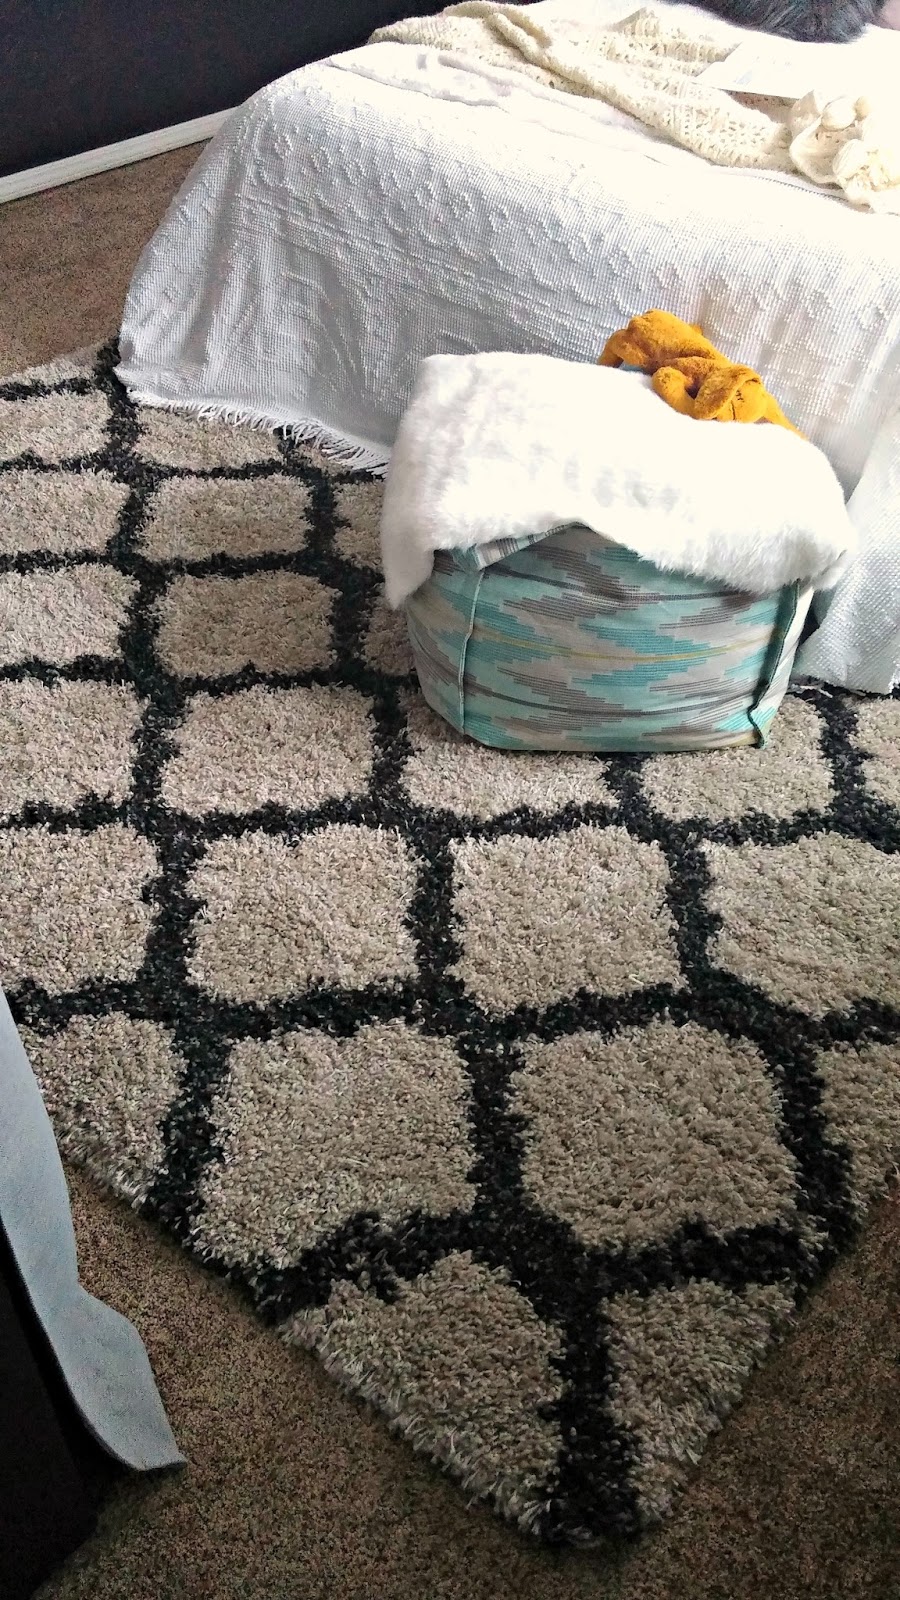 What is a Rug Pad? Here is Everything You Need to Know - RugPadUSA